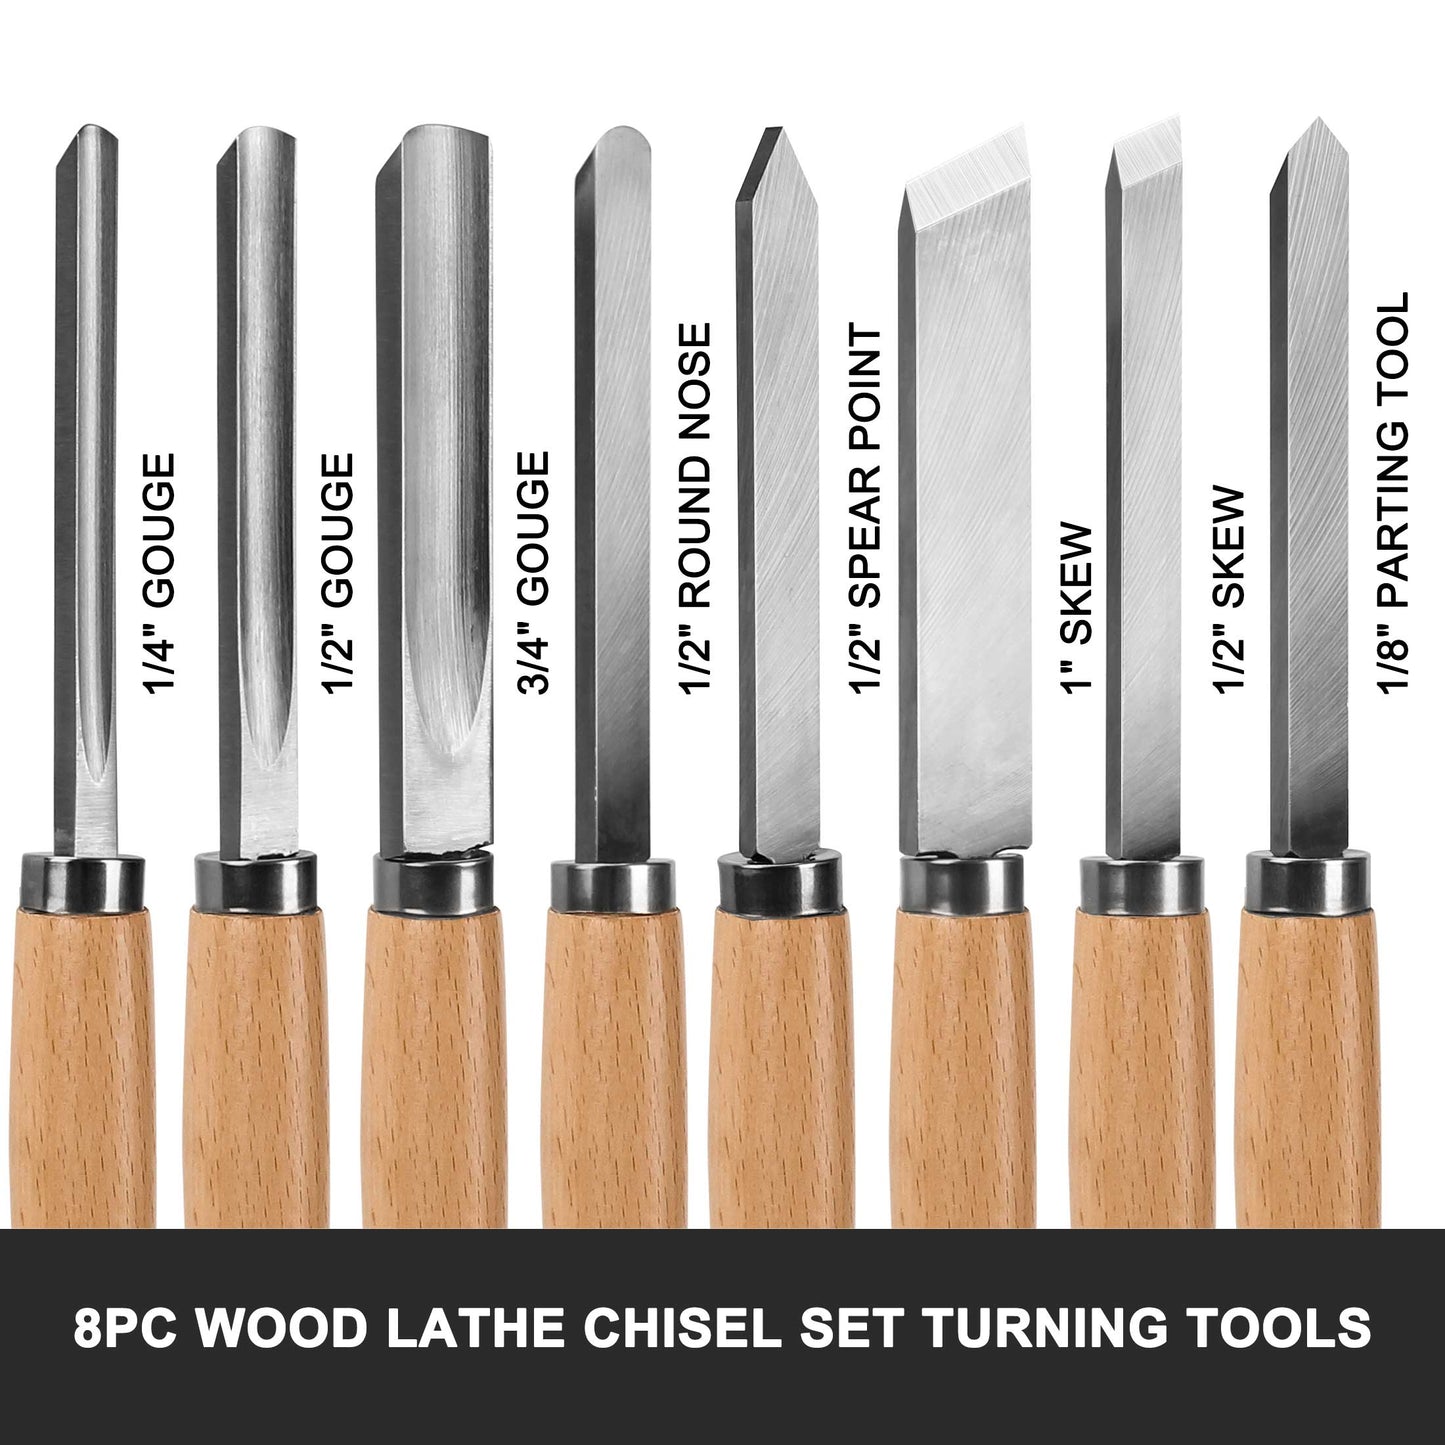 HAUTMEC Professional Wood Turning Chisel 8 pcs Set, Lathe Chisel Set with 2 Skew 1 Spear Point 1 Parting 1 Round Nose & 3 Gouge Tools for Beginners, Hobbyists and Professionals HT0237-WW